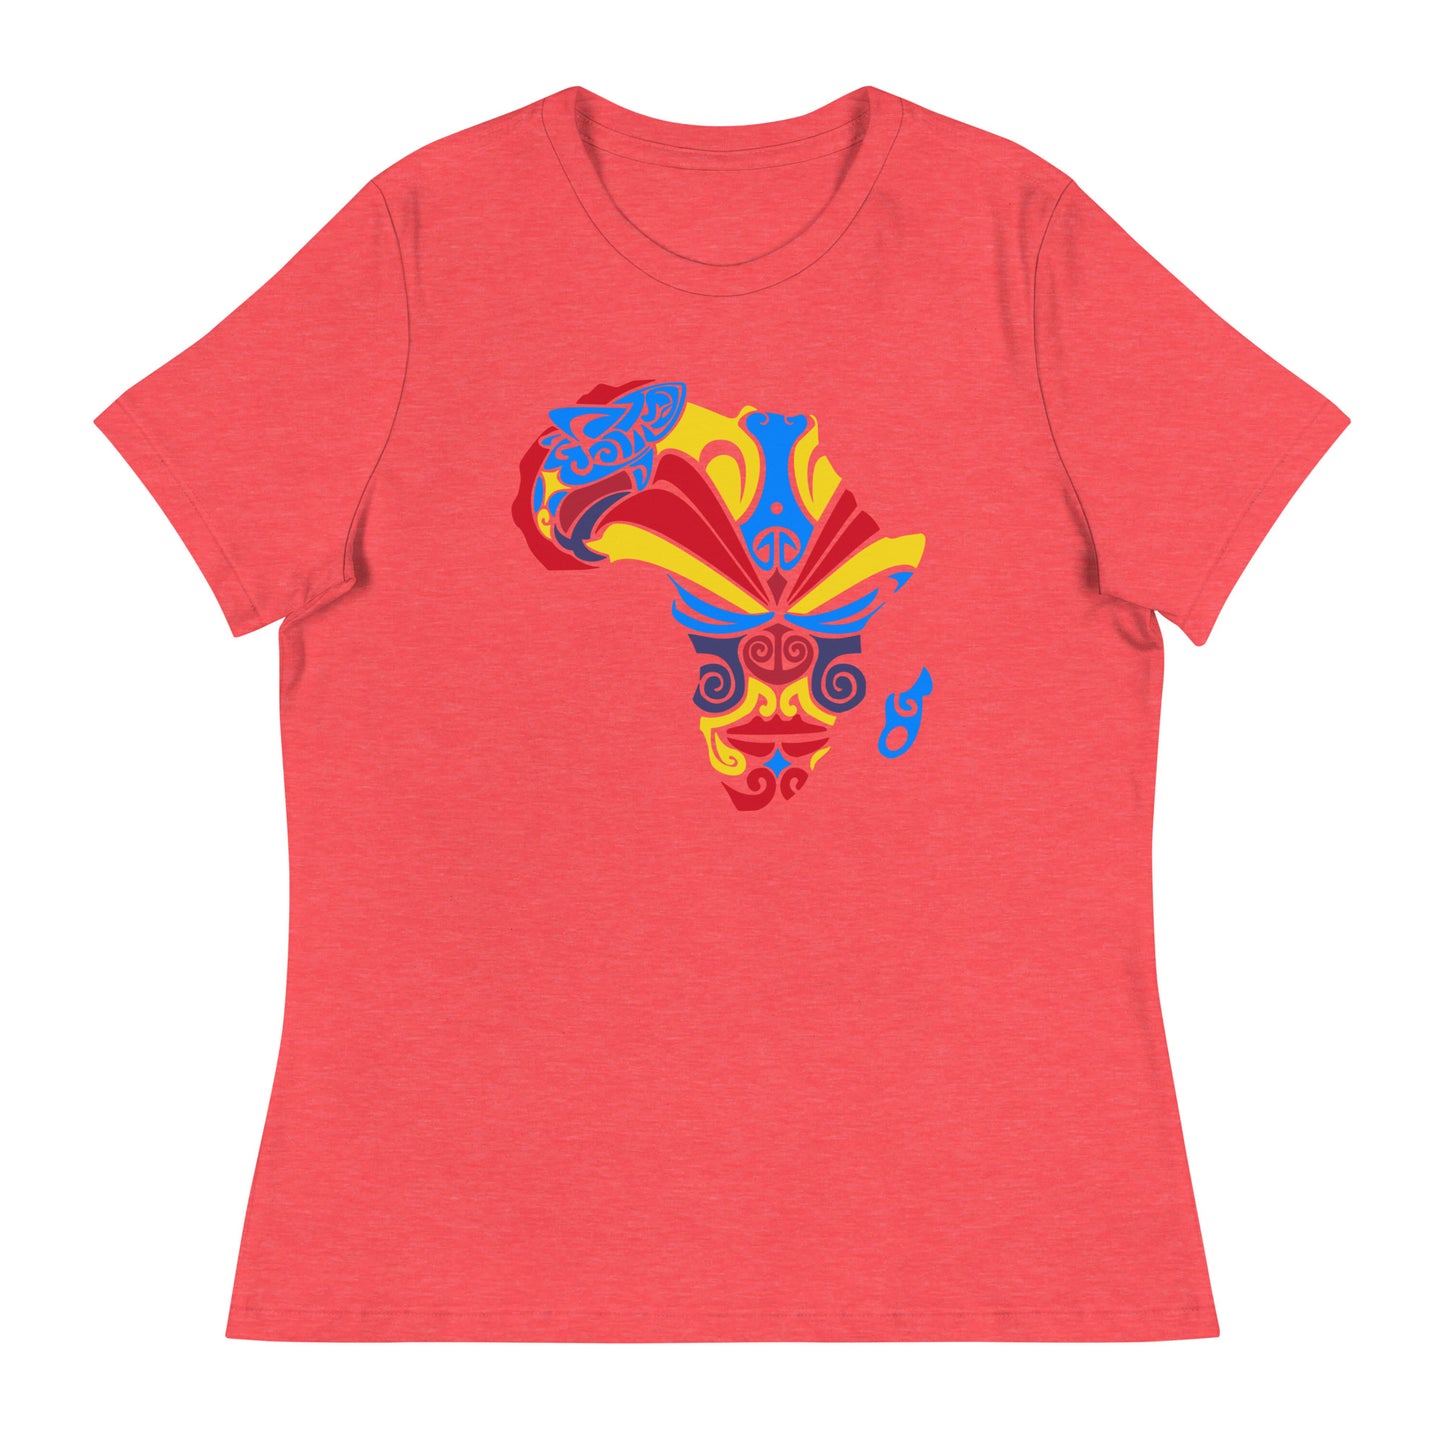 Women's Relaxed T-Shirt - Banamerica Collection